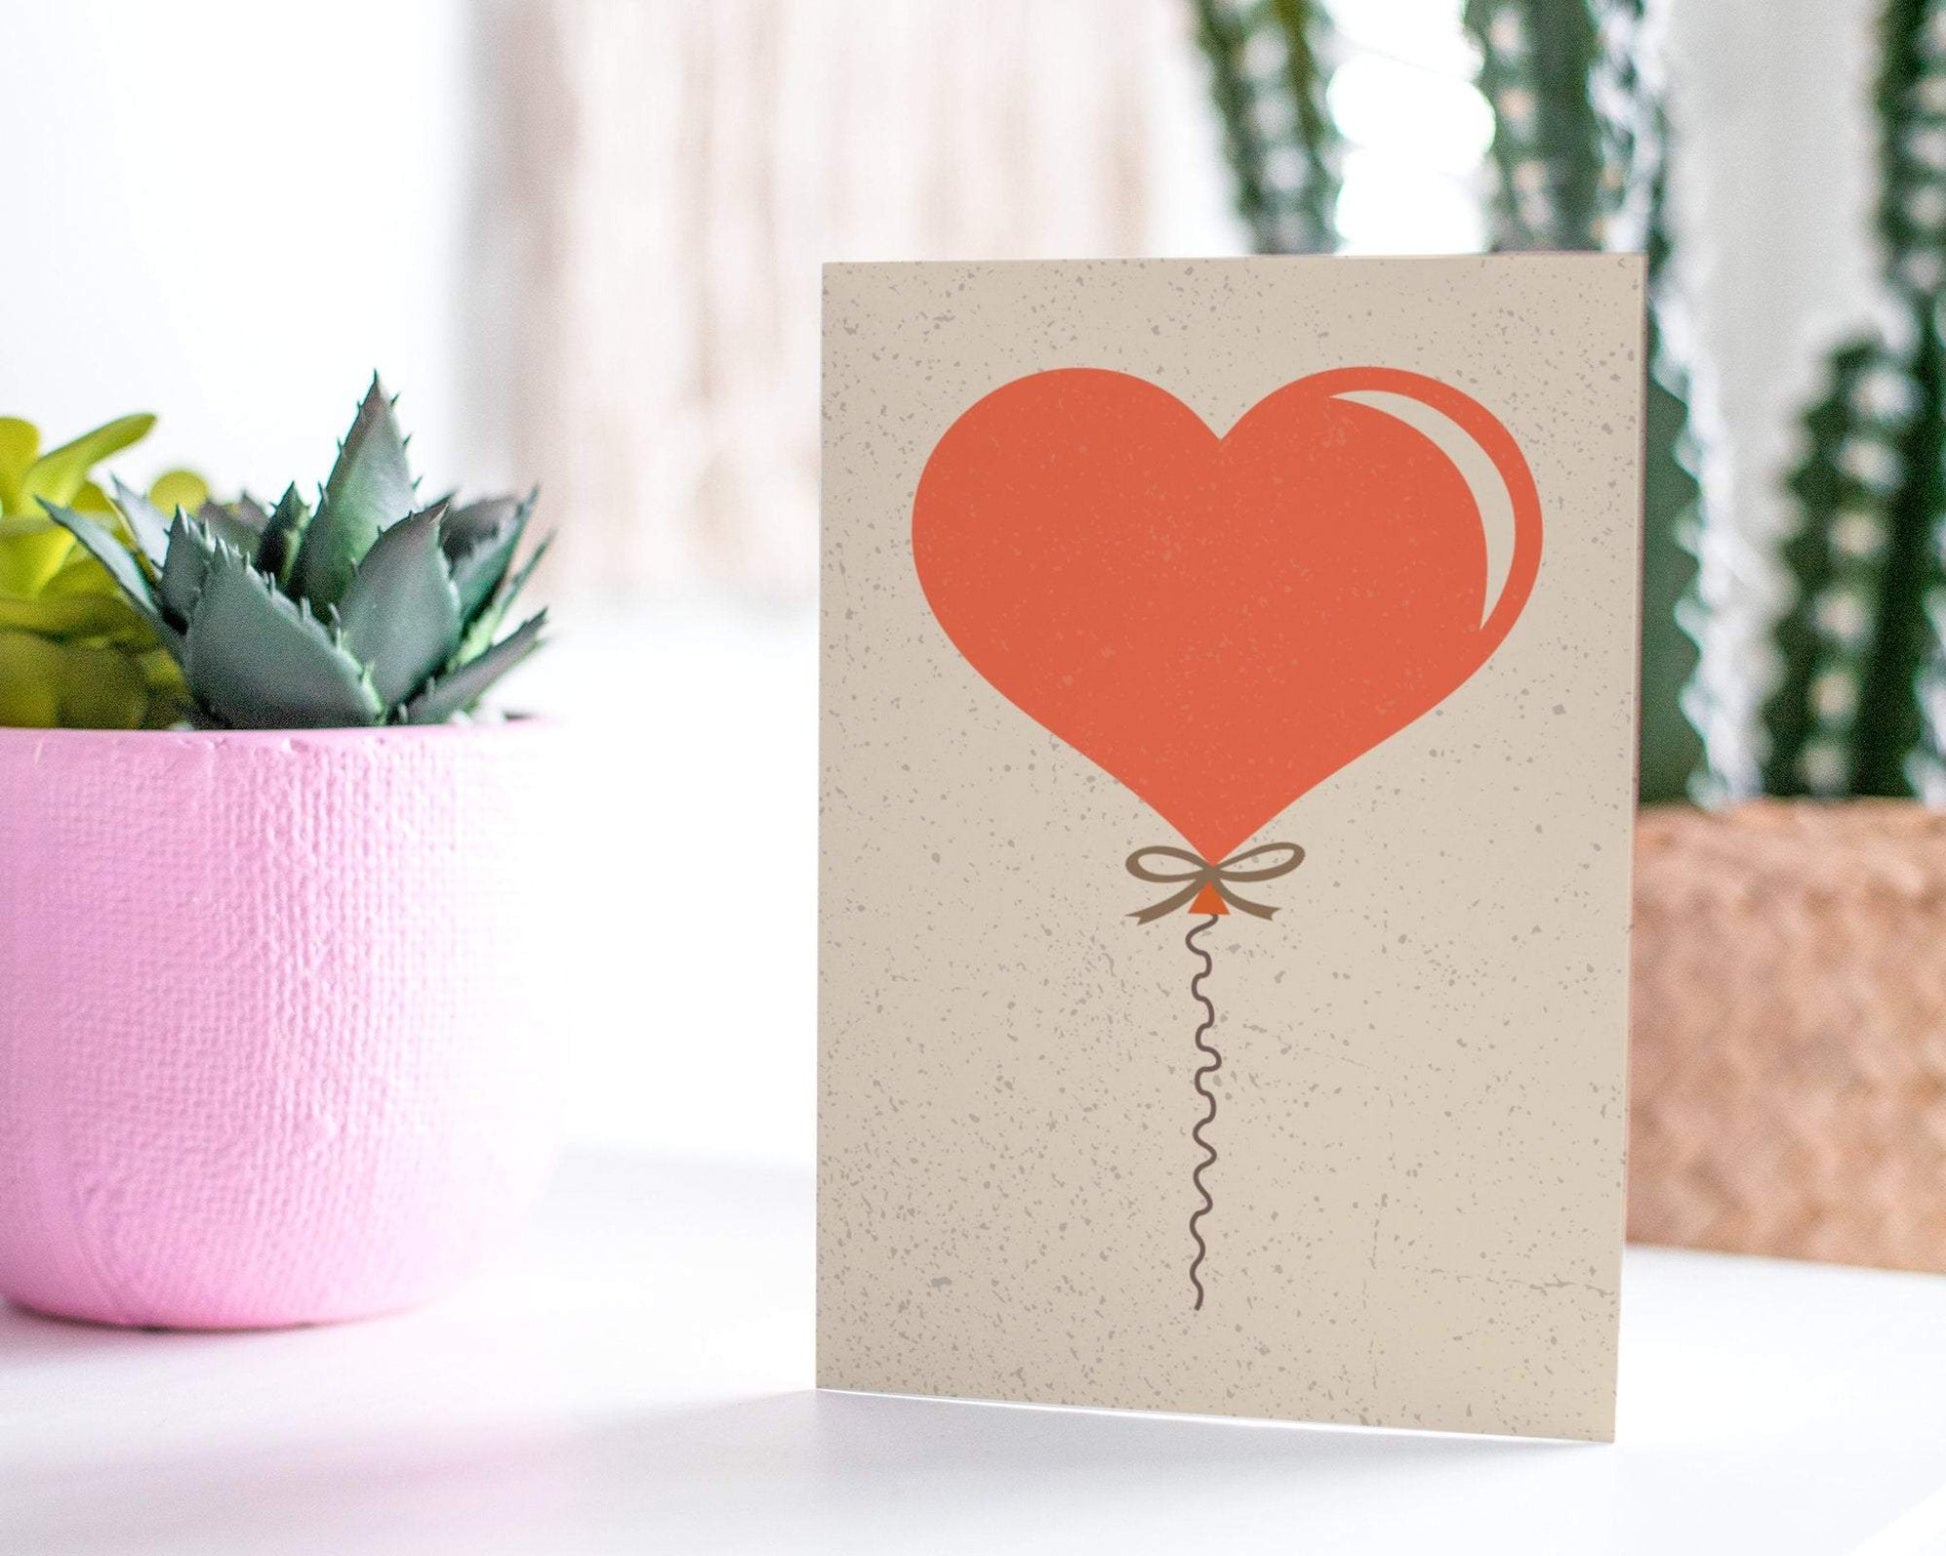 Heart Balloon Card -Thinking Of You - Anniversary Greeting Card.